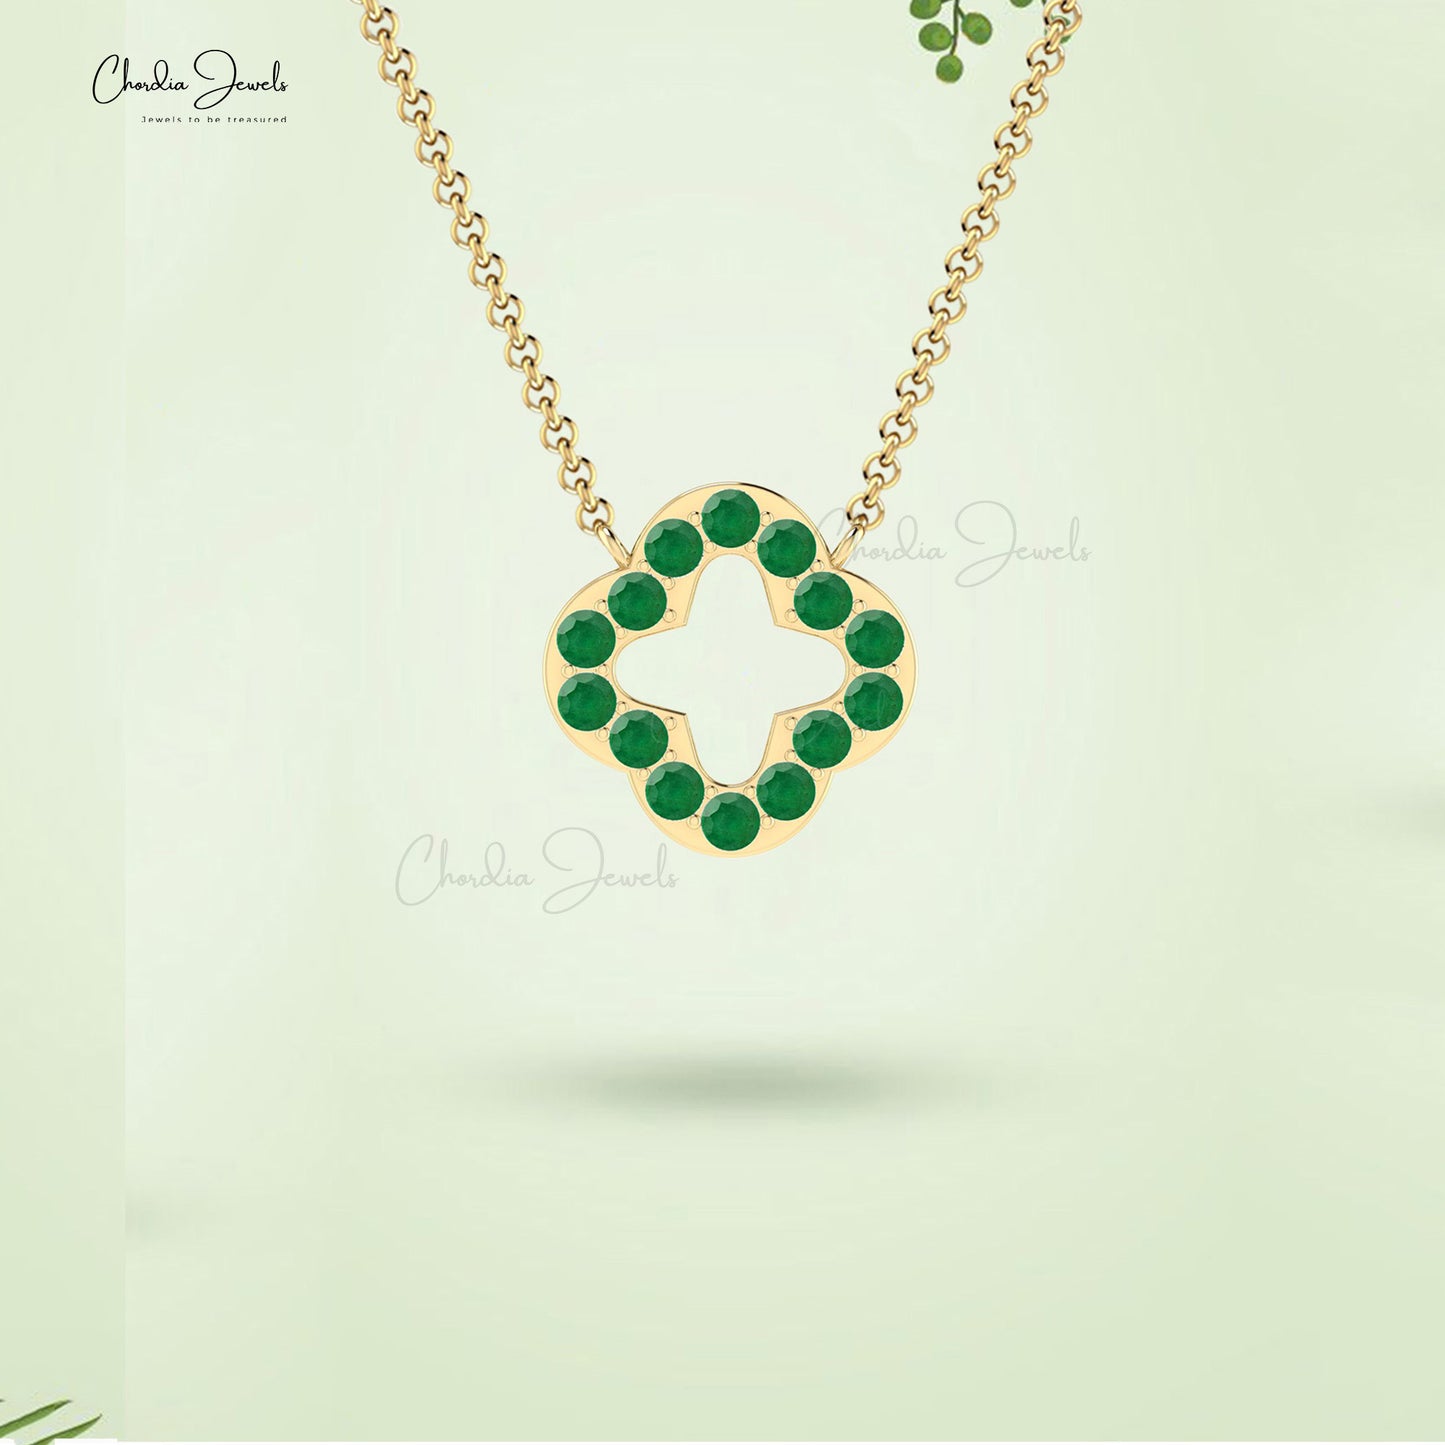 Beautiful Open Clover Necklace Pendant Pave Set Natural Green Emerald Necklace in Pure 14k Gold Gift For Her